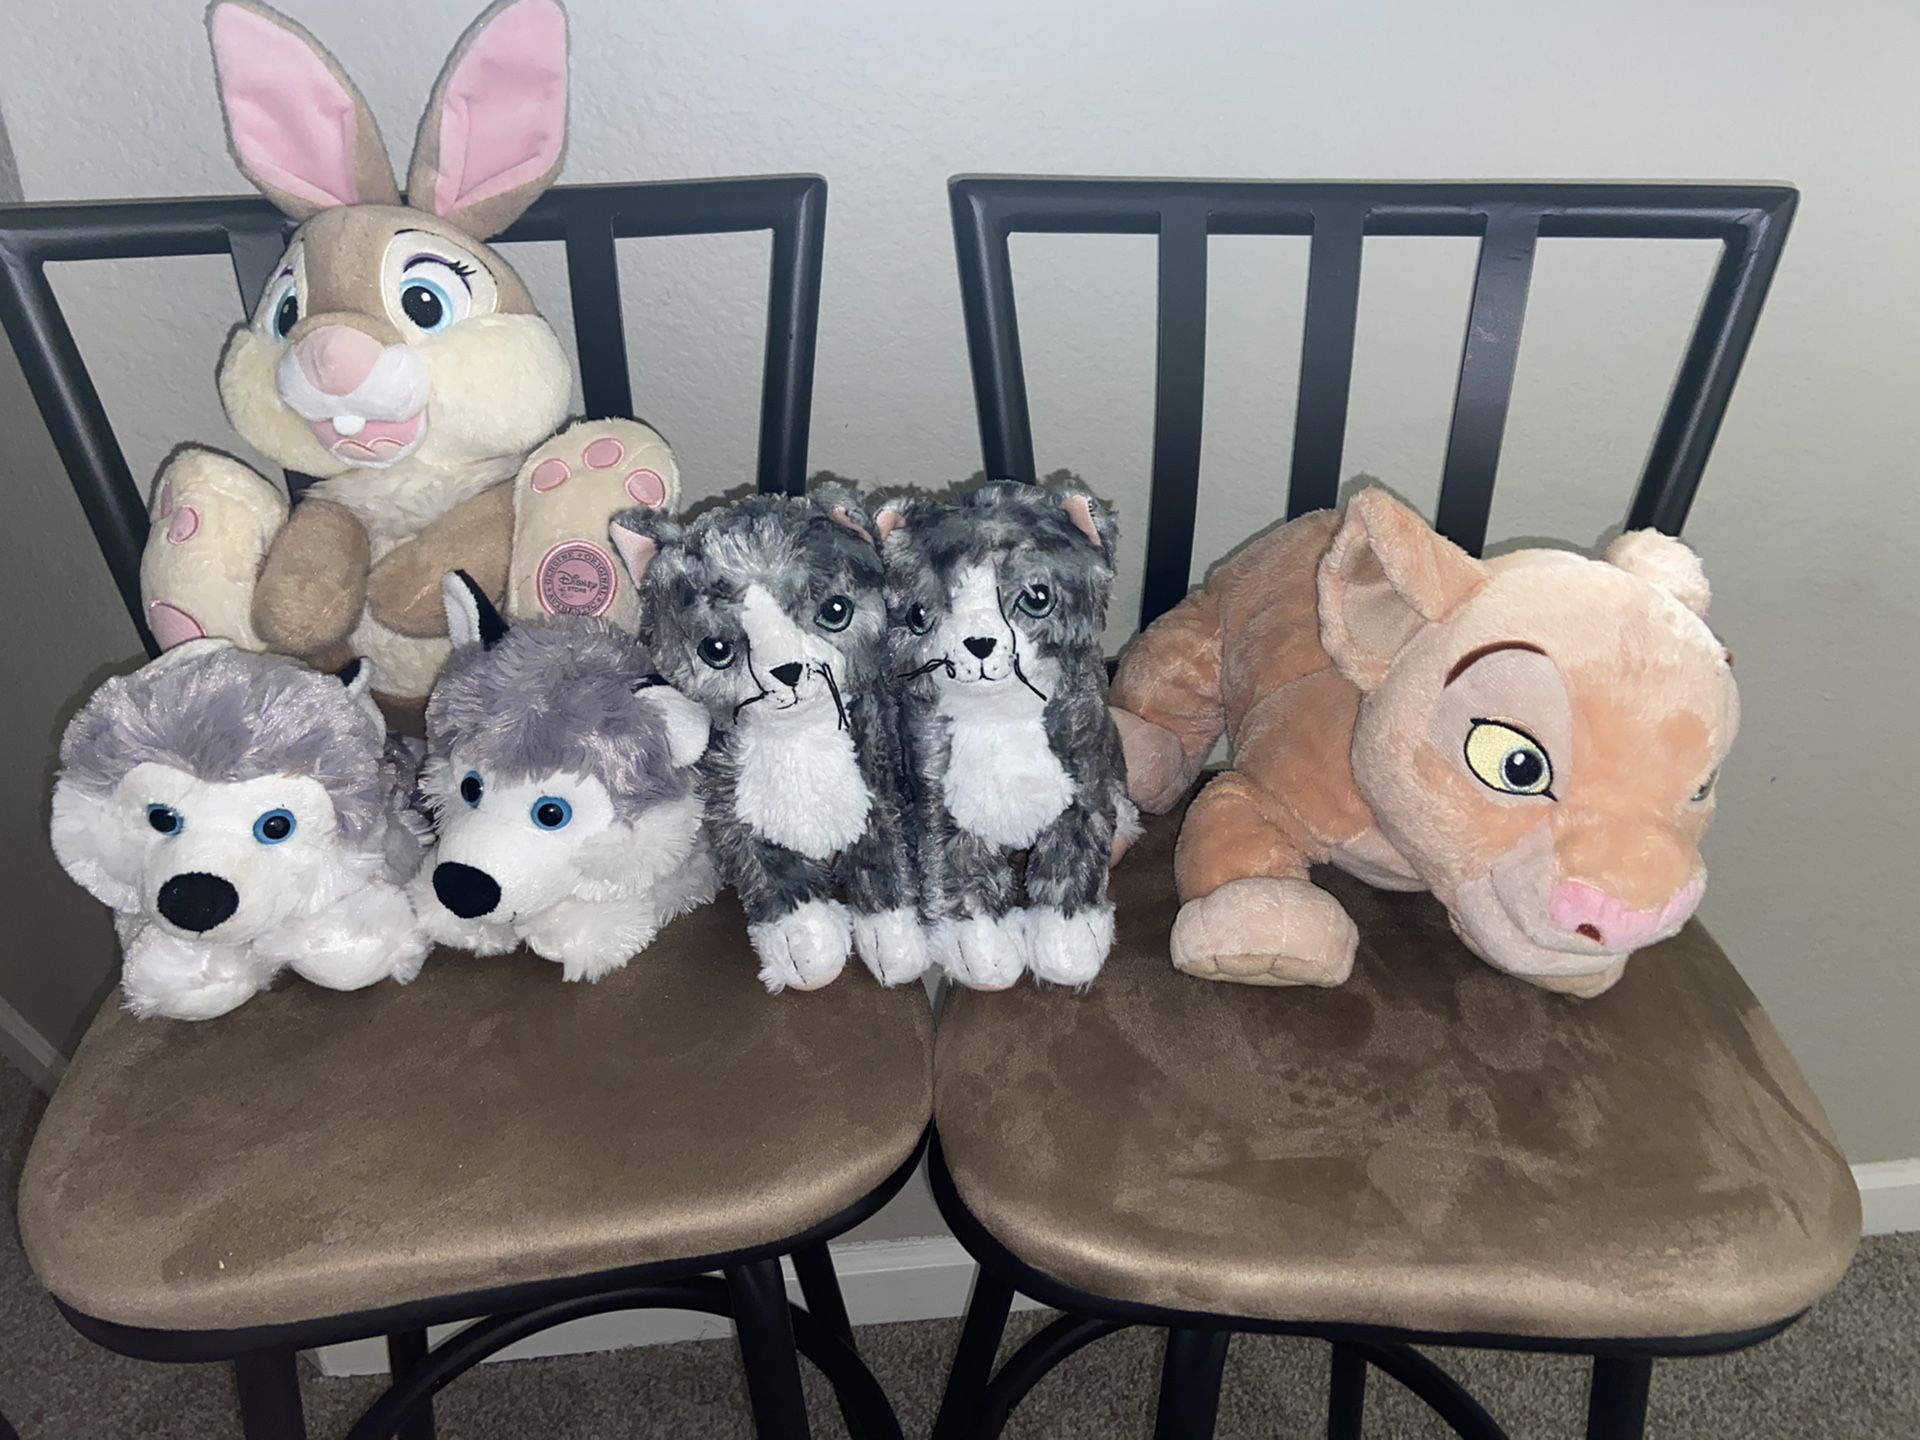 Brand new stuffed animals, waiting for their forever home !!